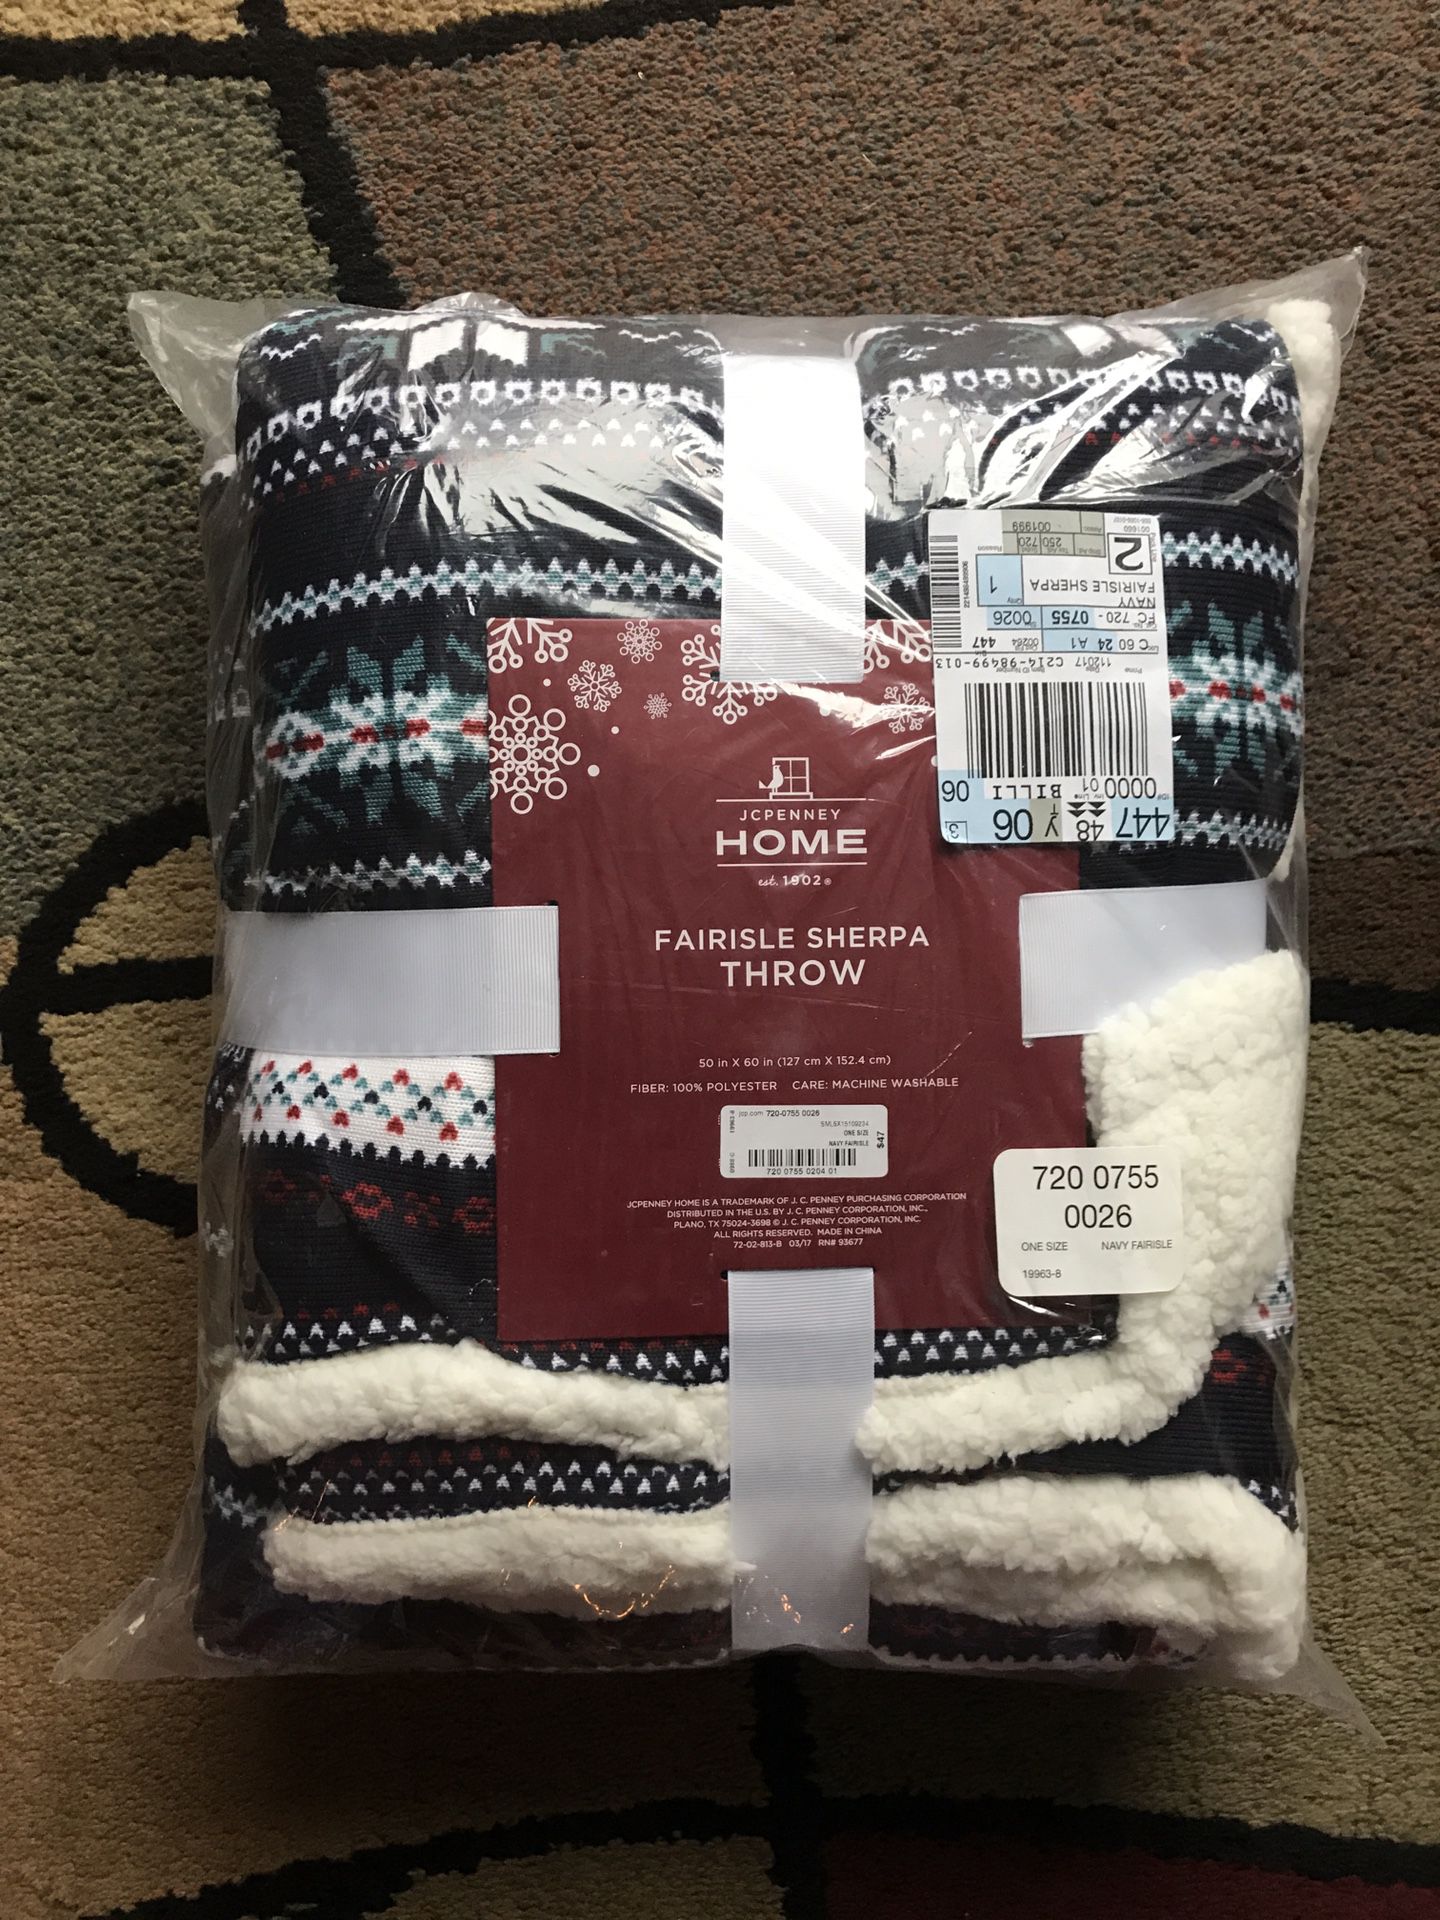 New JCPenney Home Fairisle Sherpa Throw Blanket - This has never even been taken out of plastic from shipping. It is 50” x 60”.